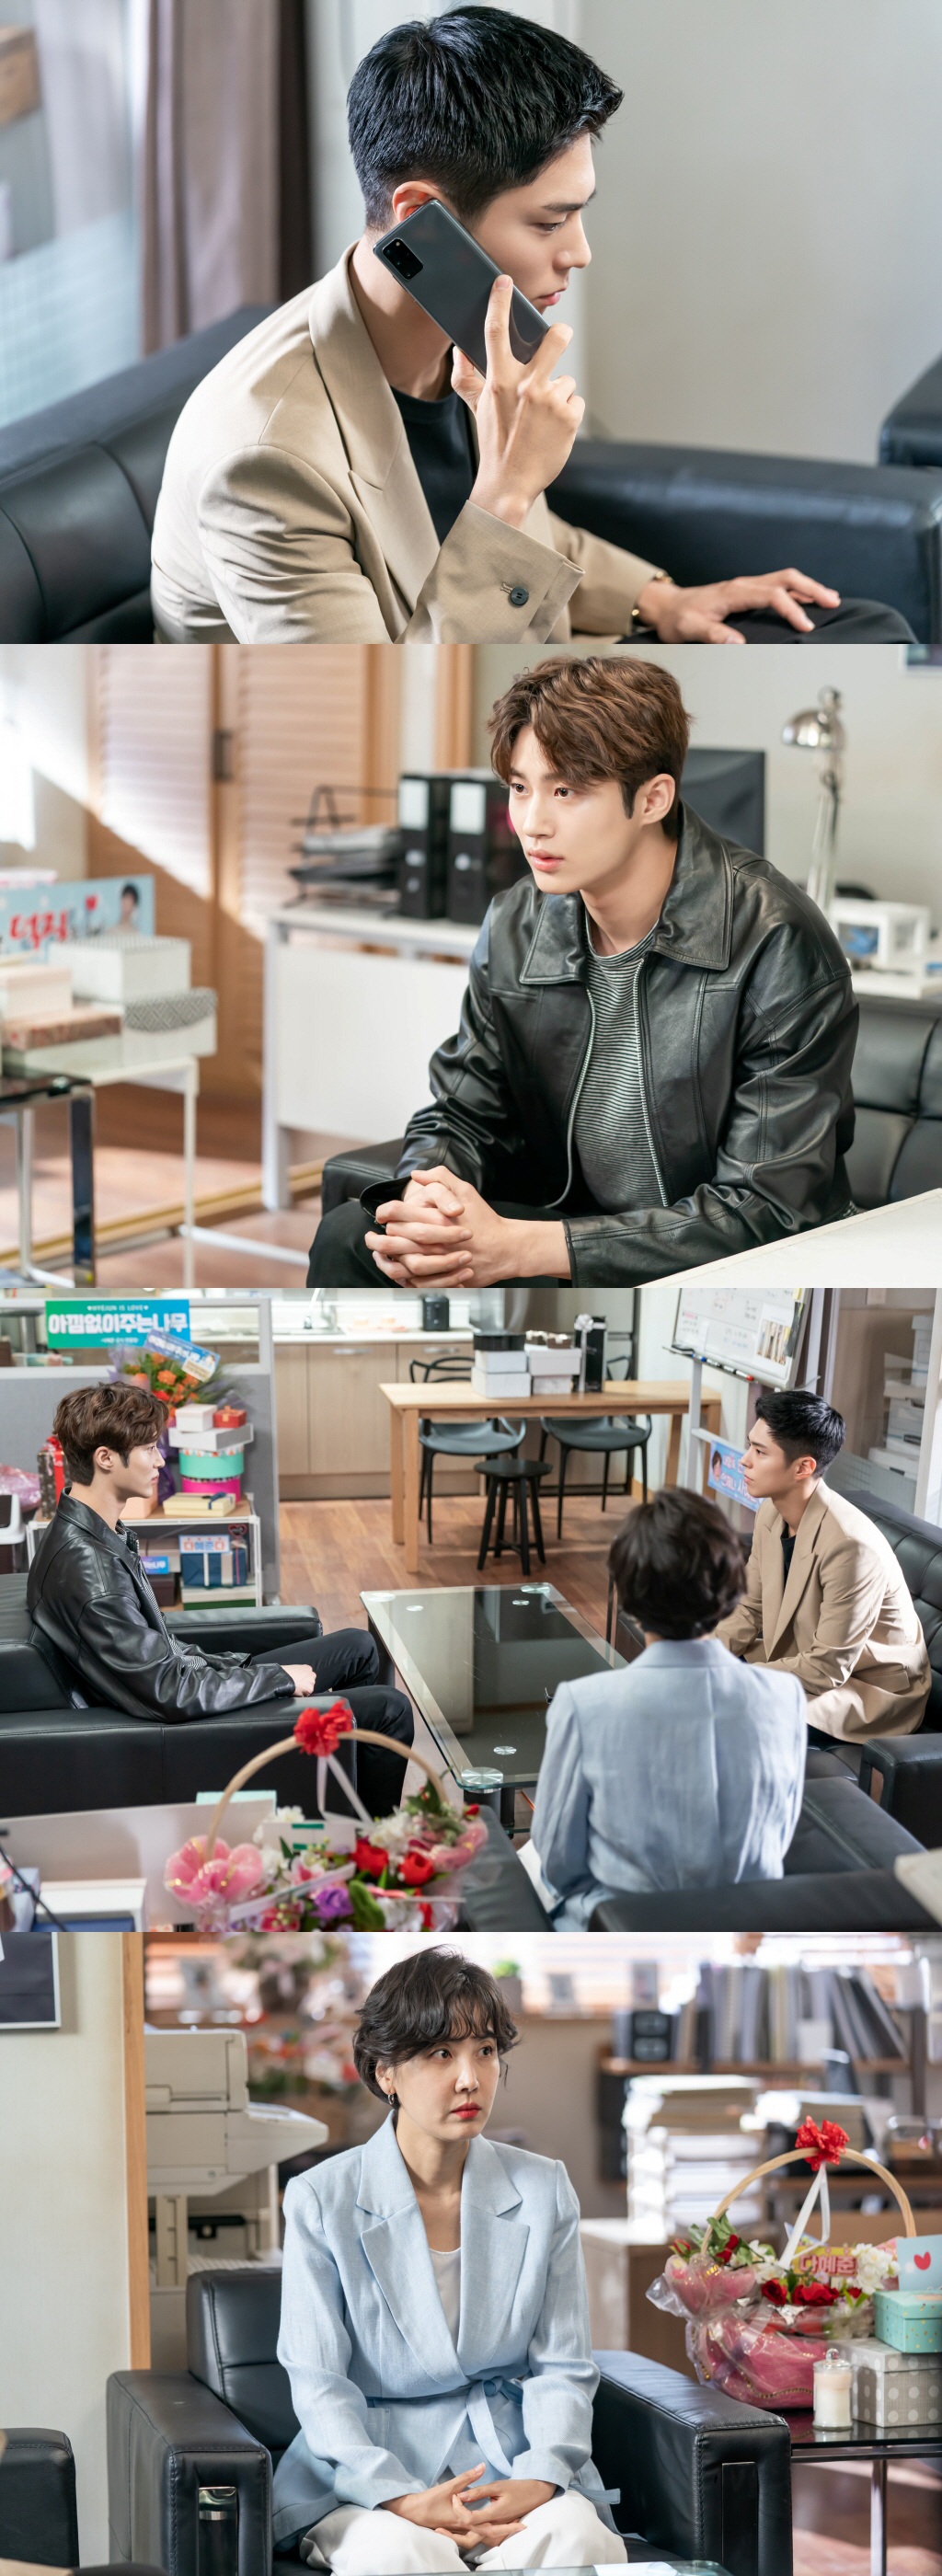 Record of Youth Park Bo-gum, Byeon Wooseok face offTVN Mon-Tue drama Record of Youth (played by Ha Myung-hee, directed by Ahn Gil-ho) released the images of Sangers Sa Hye-joon and Byeon Wooseok on the 12th.The day I have never seen before, I am curious about the nerves.In the last broadcast, Sa Hye-joon won the best performance award by succeeding in the drama Return of the King.Sa Hye-joons unstoppable Shus move, which has achieved Actors dream over the cold reality, has given a thrilling Qatarsis, but unexpected trials have come.The news of Charlie Chung (Lee Seung-jun)s death, which was taken by Sa Hye-joon at the moment of enjoying happiness, amplified his curiosity about future development.In the meantime, the tension of Champon Entertainment is caught, further heightening the sense of Danger.The hard face of Sa Hye-joon, who is talking to someone, makes him guess the unusual incident that came to him.With the silence flowing, the eye-catching of Sa Hye-joon and Won Hae-hyo Day pulls the tension tight. Manager Lee Min-jae (Shin Dong-mi) is also confused.Sa Hye-joon and Won Hae-hyo, who supported each other more than anyone else while growing the same dream, are drawing attention to what changes will come to the two youths who face the crossroads of different Choices.In the 11th episode, which will air on the 12th, Sa Hye-joons overcoming stage, which faces an unexpected ordeal, will be portrayed. An unwelcome helper will appear to Sa Hye-joon, who is suffering from rumors that Charlies justice death cannot control.Record of Youth production team said, Please pay attention to whether you can protect your dreams, love and friendship in your own Danger.Choices of Sa Hye-joon, who does not lose his conviction, will have another impression and Qatarsis. On the other hand, tvN Mon-Tue drama Record of Youth 11th will be broadcast at 9 pm on the 12th.